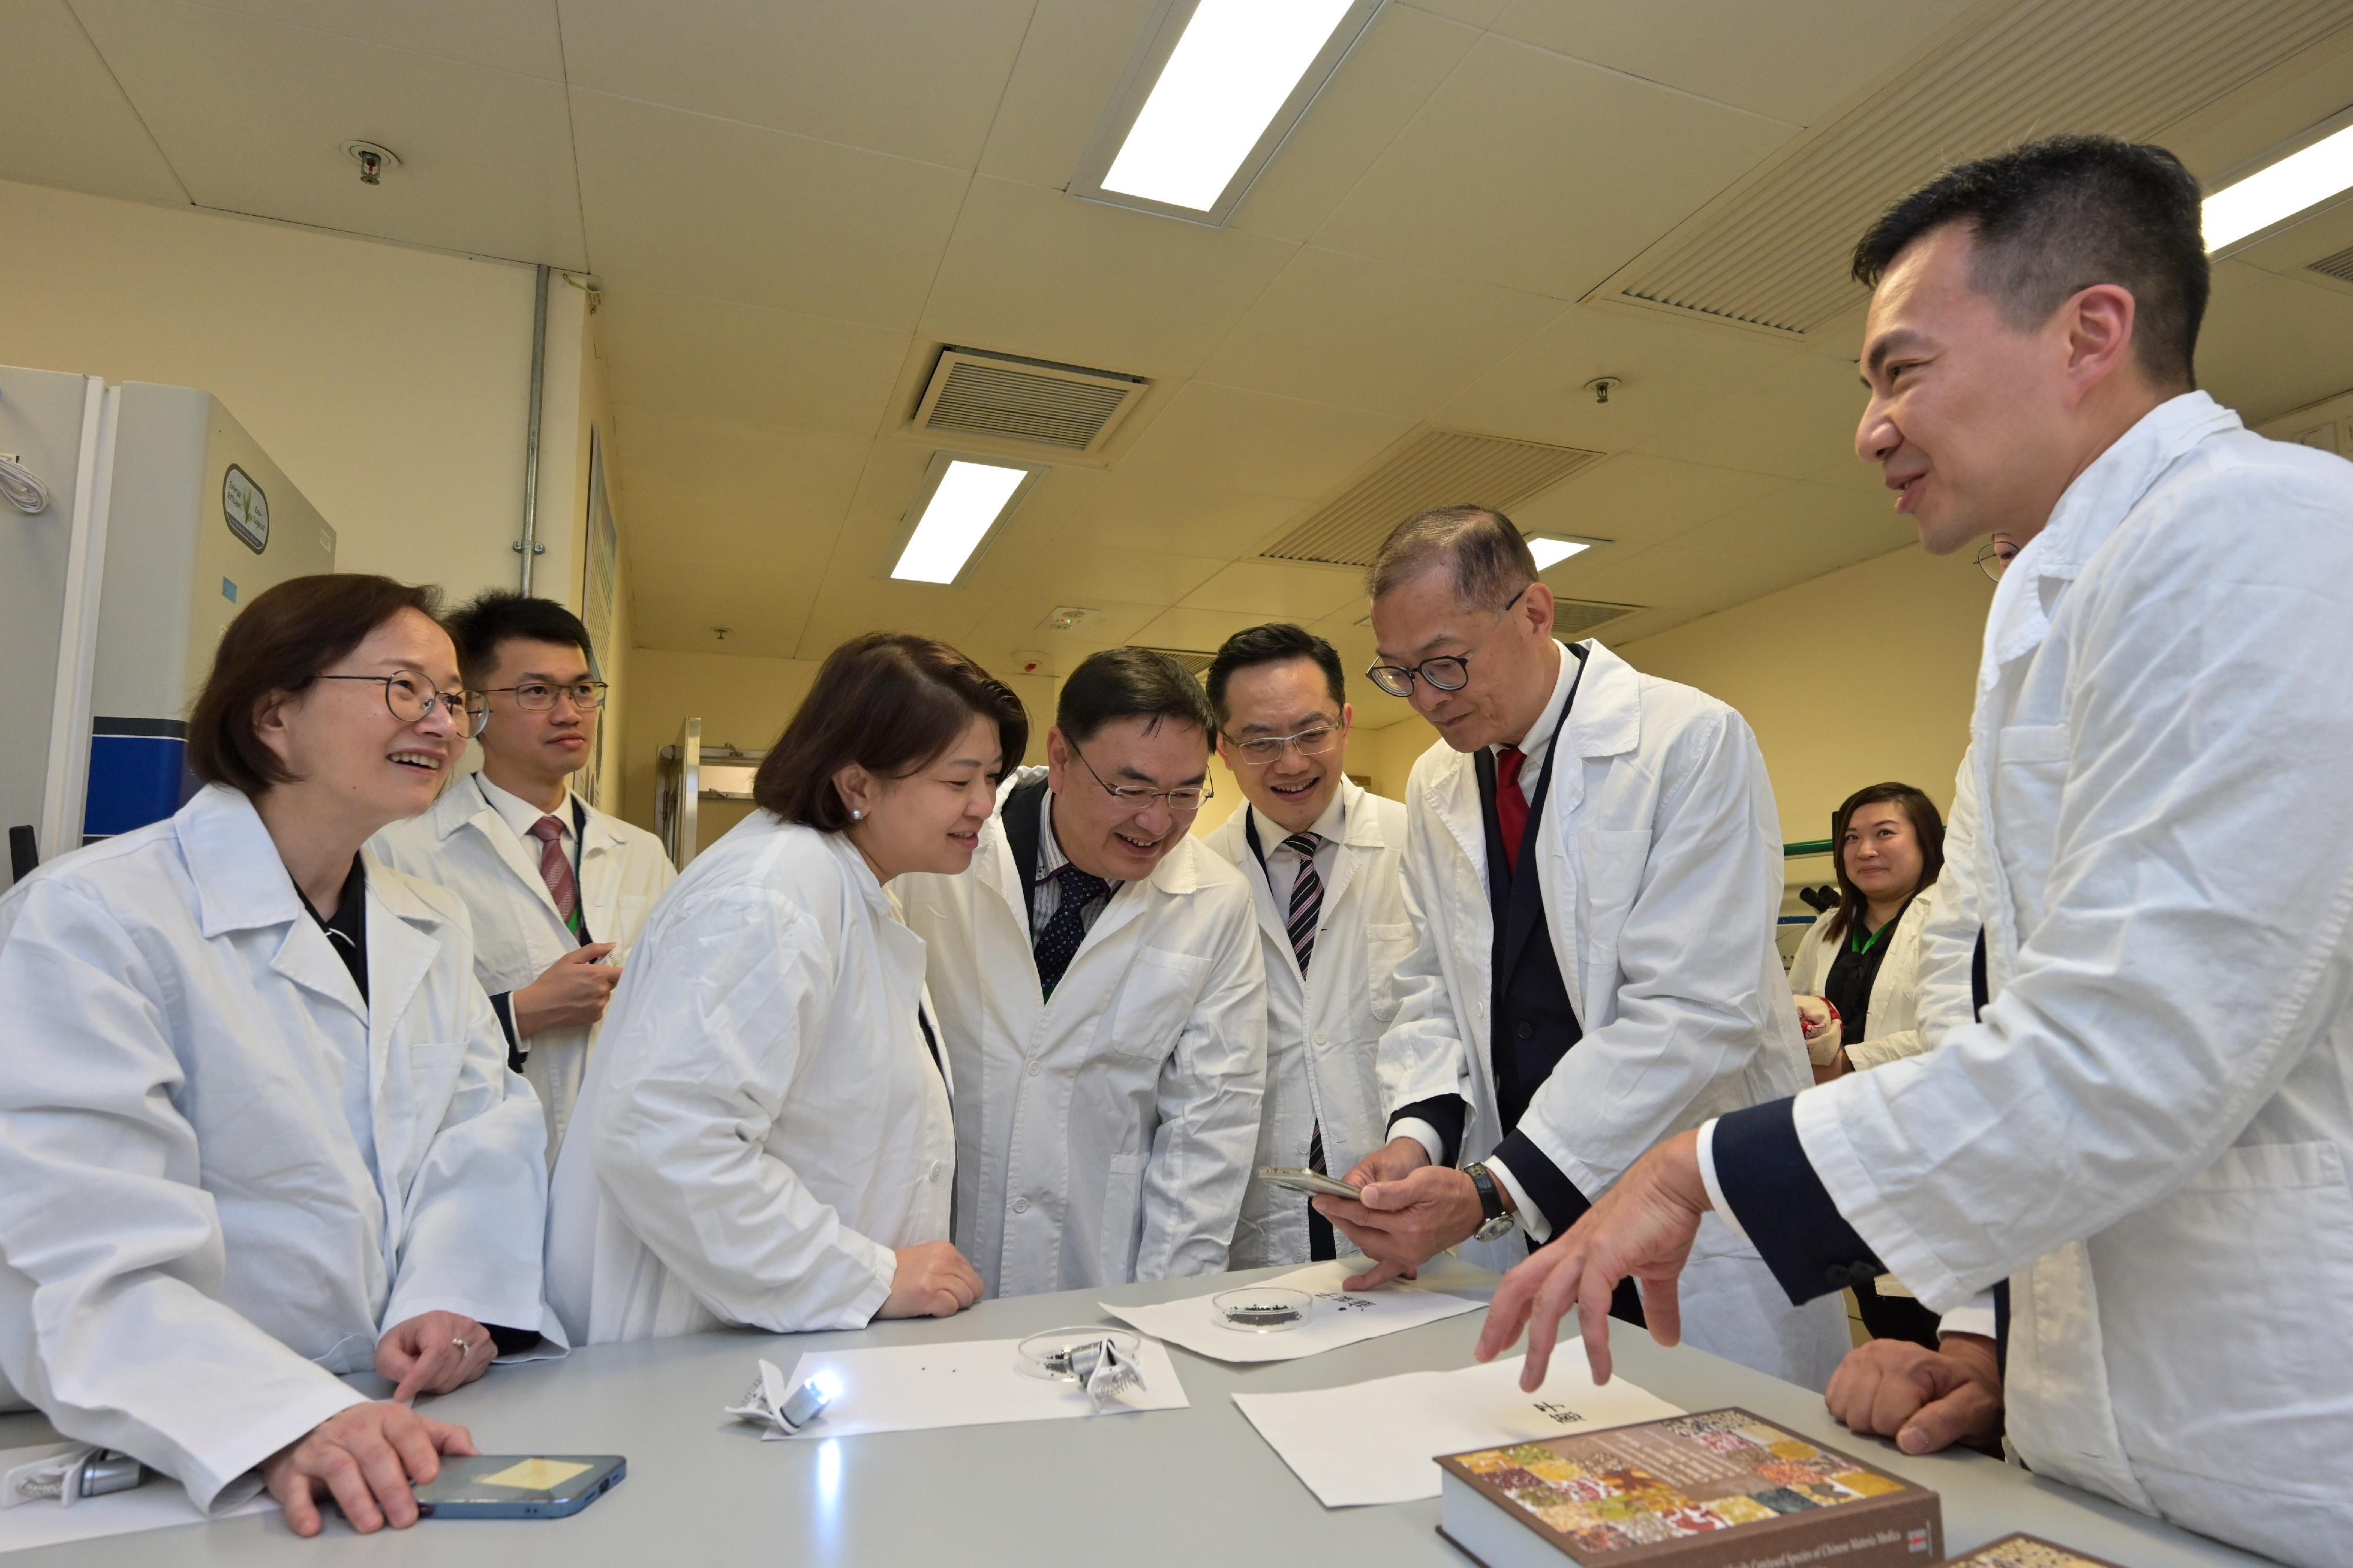 The Secretary for Health, Professor Lo Chung-mau, today (March 26) attended the launch ceremony of the Department of Health's new dedicated website Digital Herbarium for Chinese Medicines. Photo shows Professor Lo (sixth left), accompanied by the Director of Health, Dr Ronald Lam (fifth left), visiting the Government Chinese Medicines Testing Institute of the Department of Health, which is located in Hong Kong Science Park.